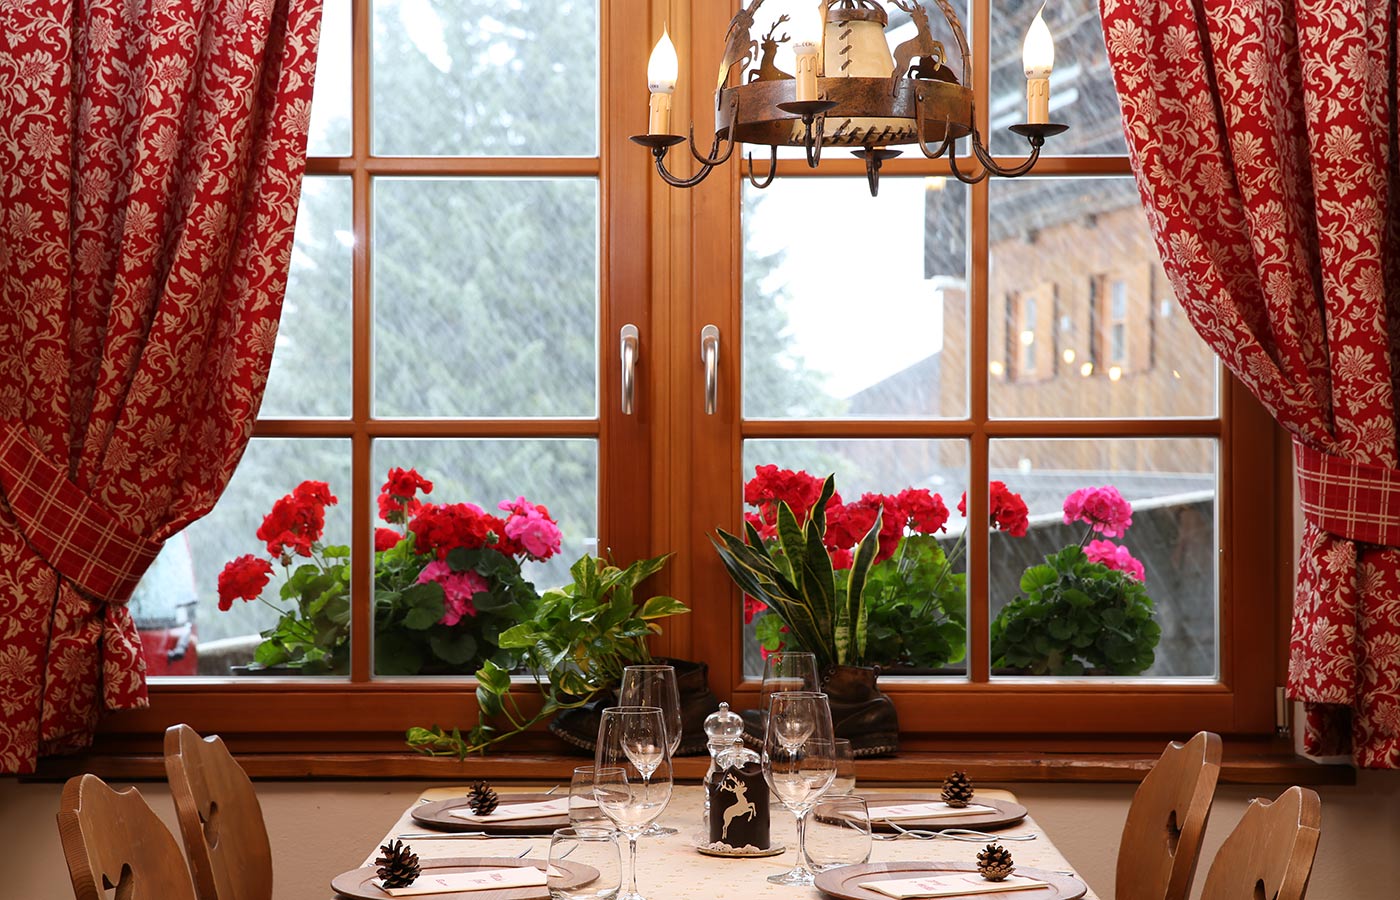 Wood window with red curtains and flowers on the sill over a prepared table